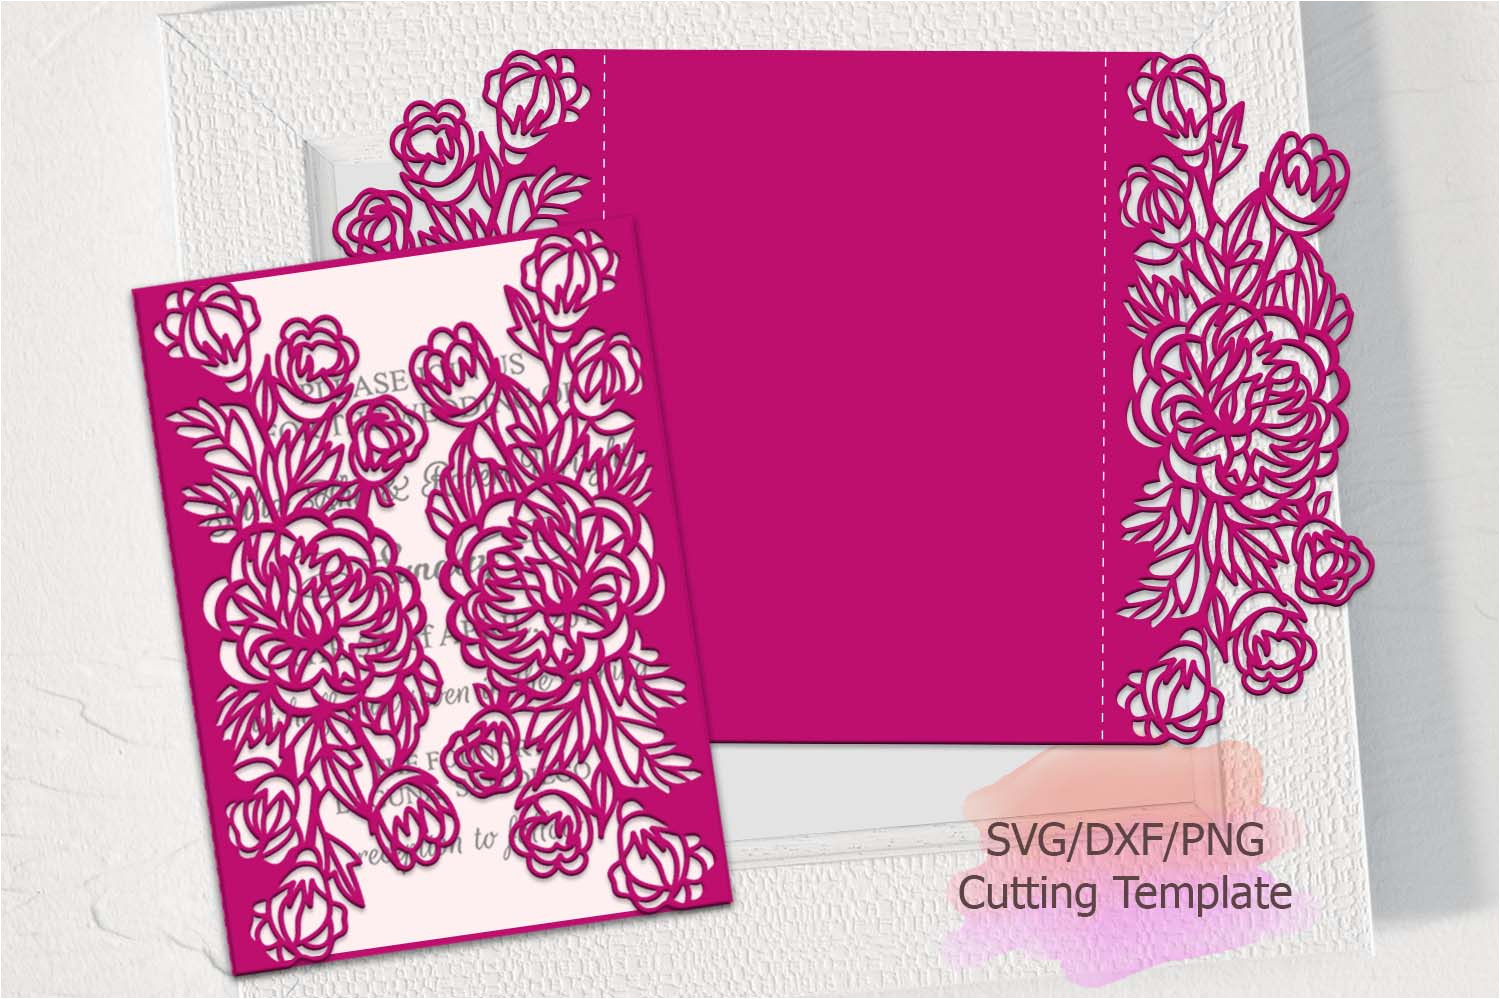 84363 peonies gate svg invitation wedding invitations fold card template quinceanera svg cut template cut files floral laser peony svg dxf